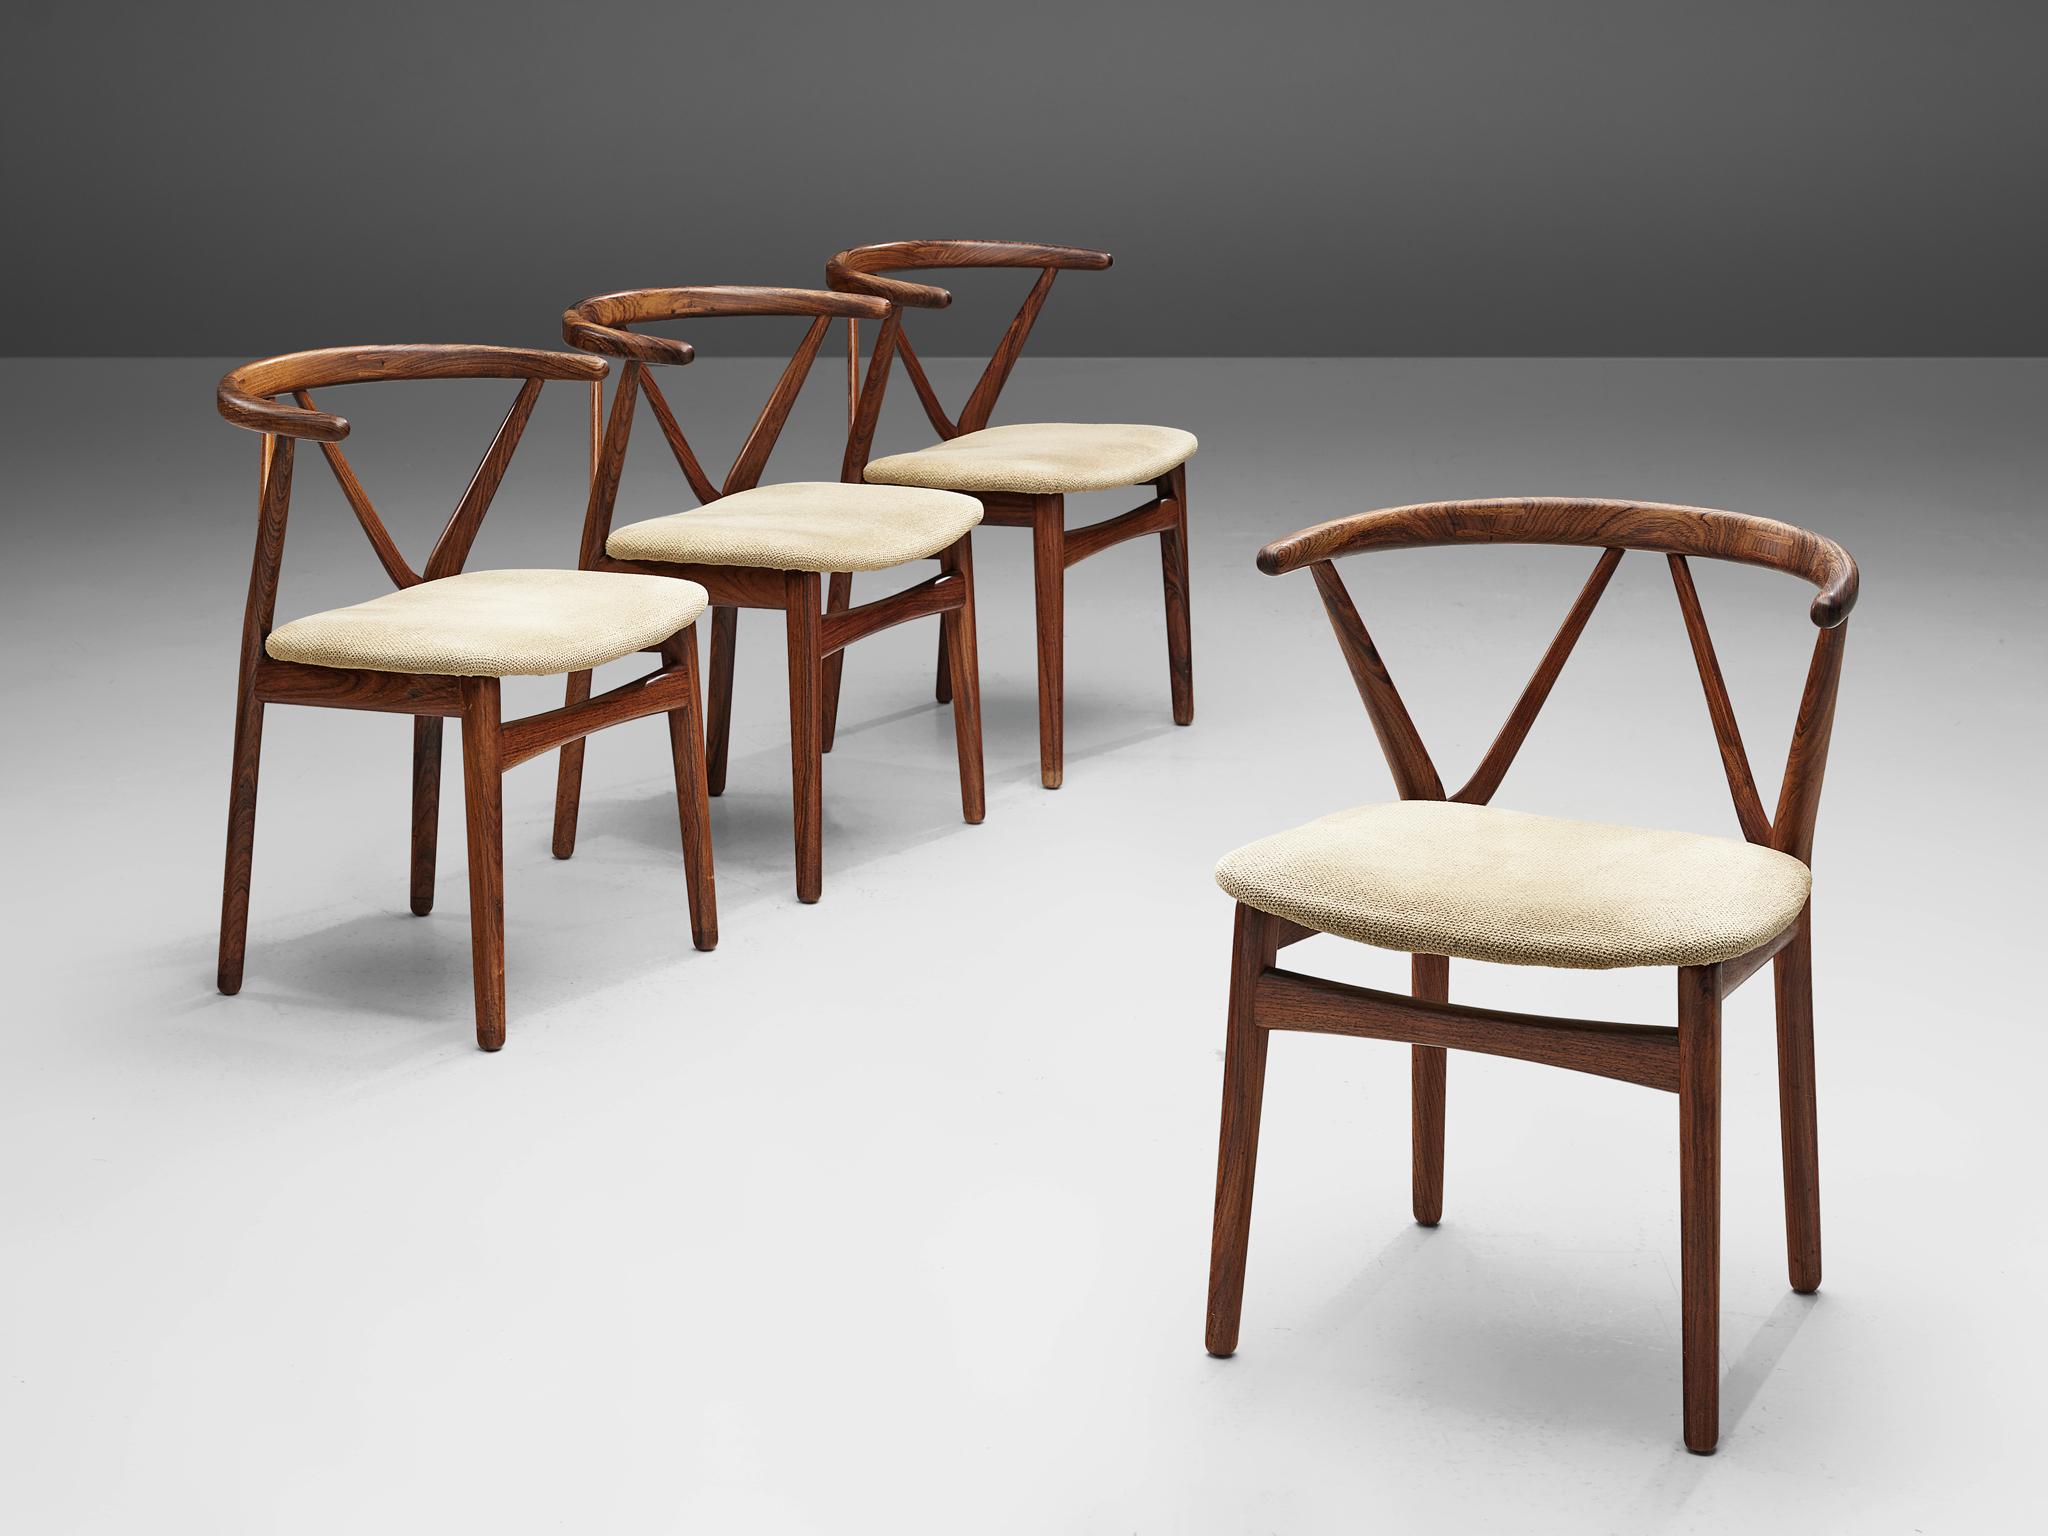 Henning Kjaernulf for Bruno Hansen, set of four dining chairs model 255, rosewood, off-white textured upholstery, Denmark, 1950s. 

Set of four elegant dining chairs made out of rosewood with a beautiful curved back. The diagonal support of the